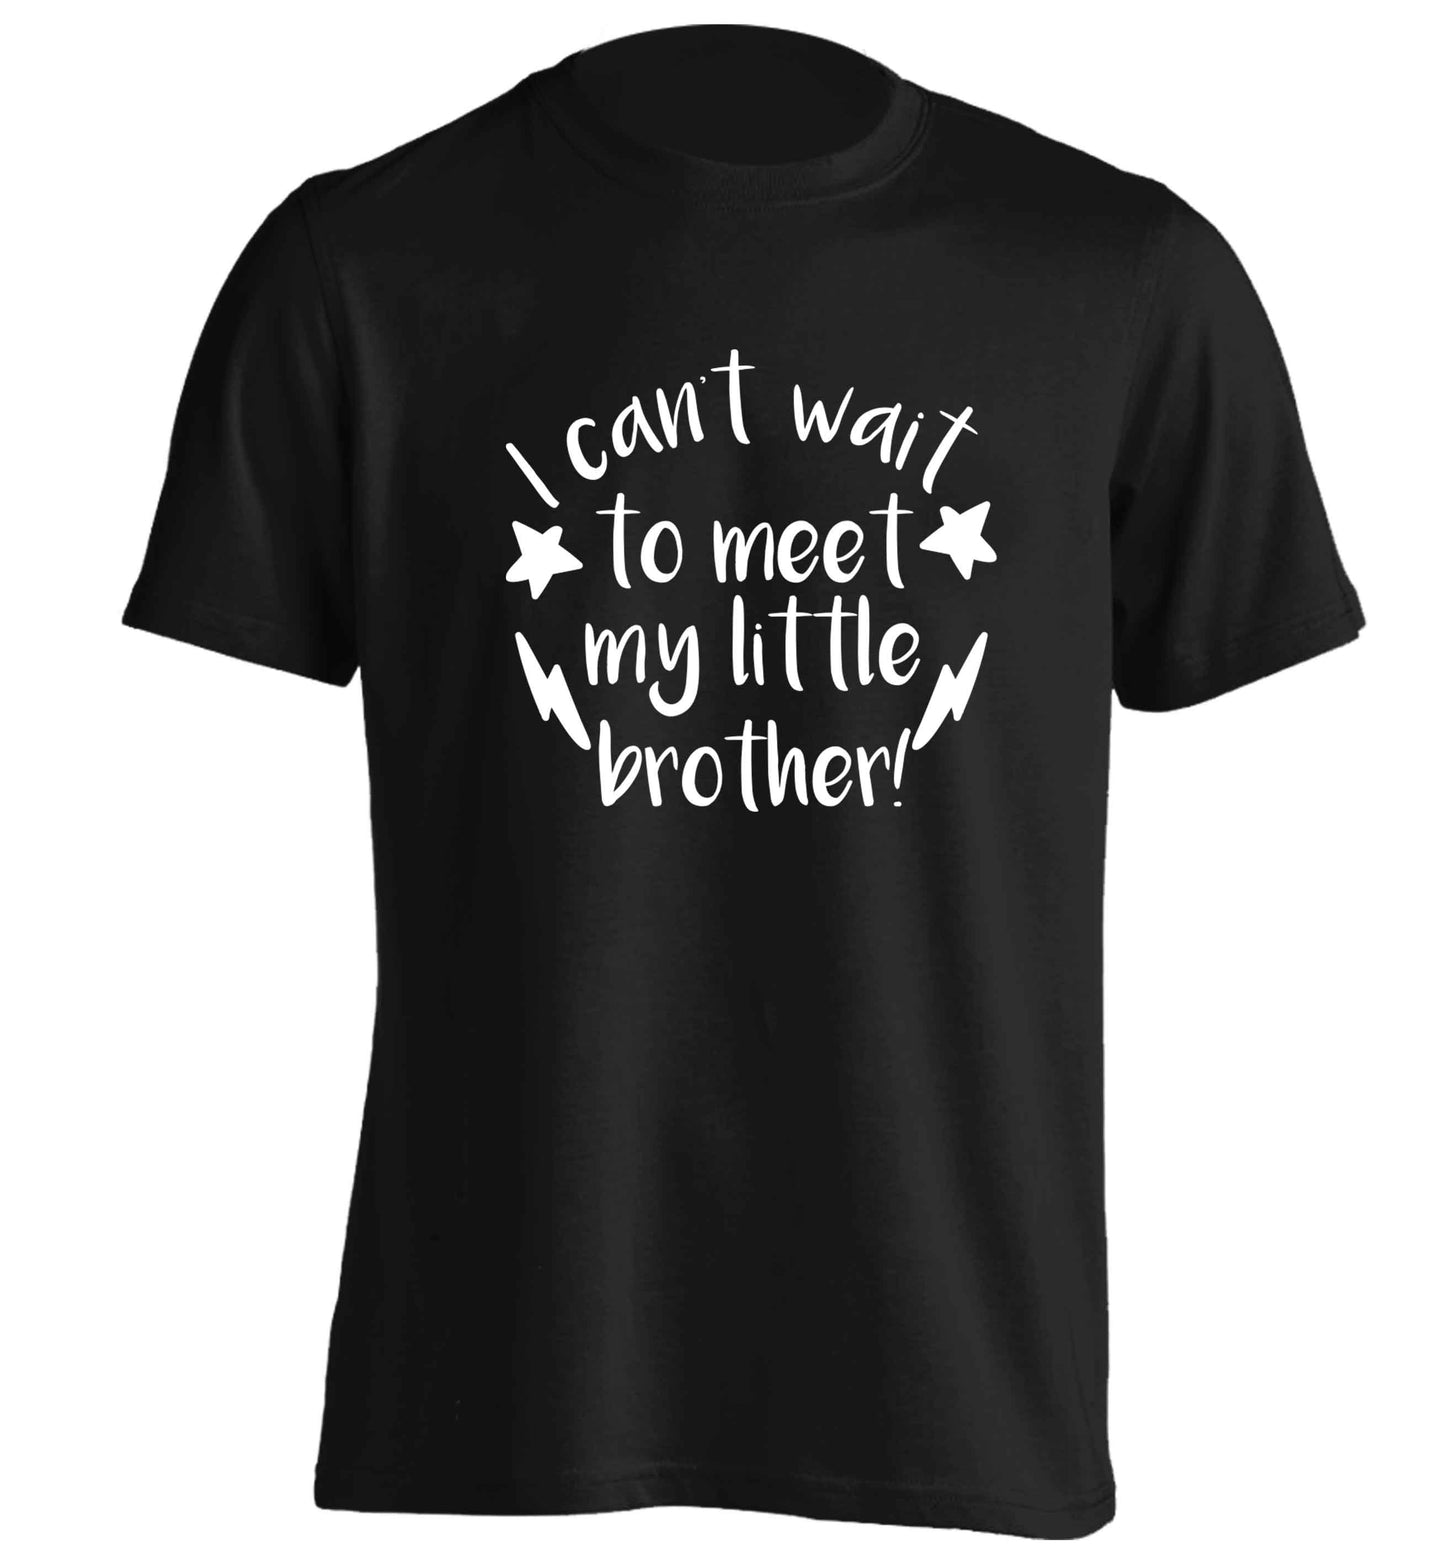 I can't wait to meet my sister! adults unisex black Tshirt 2XL